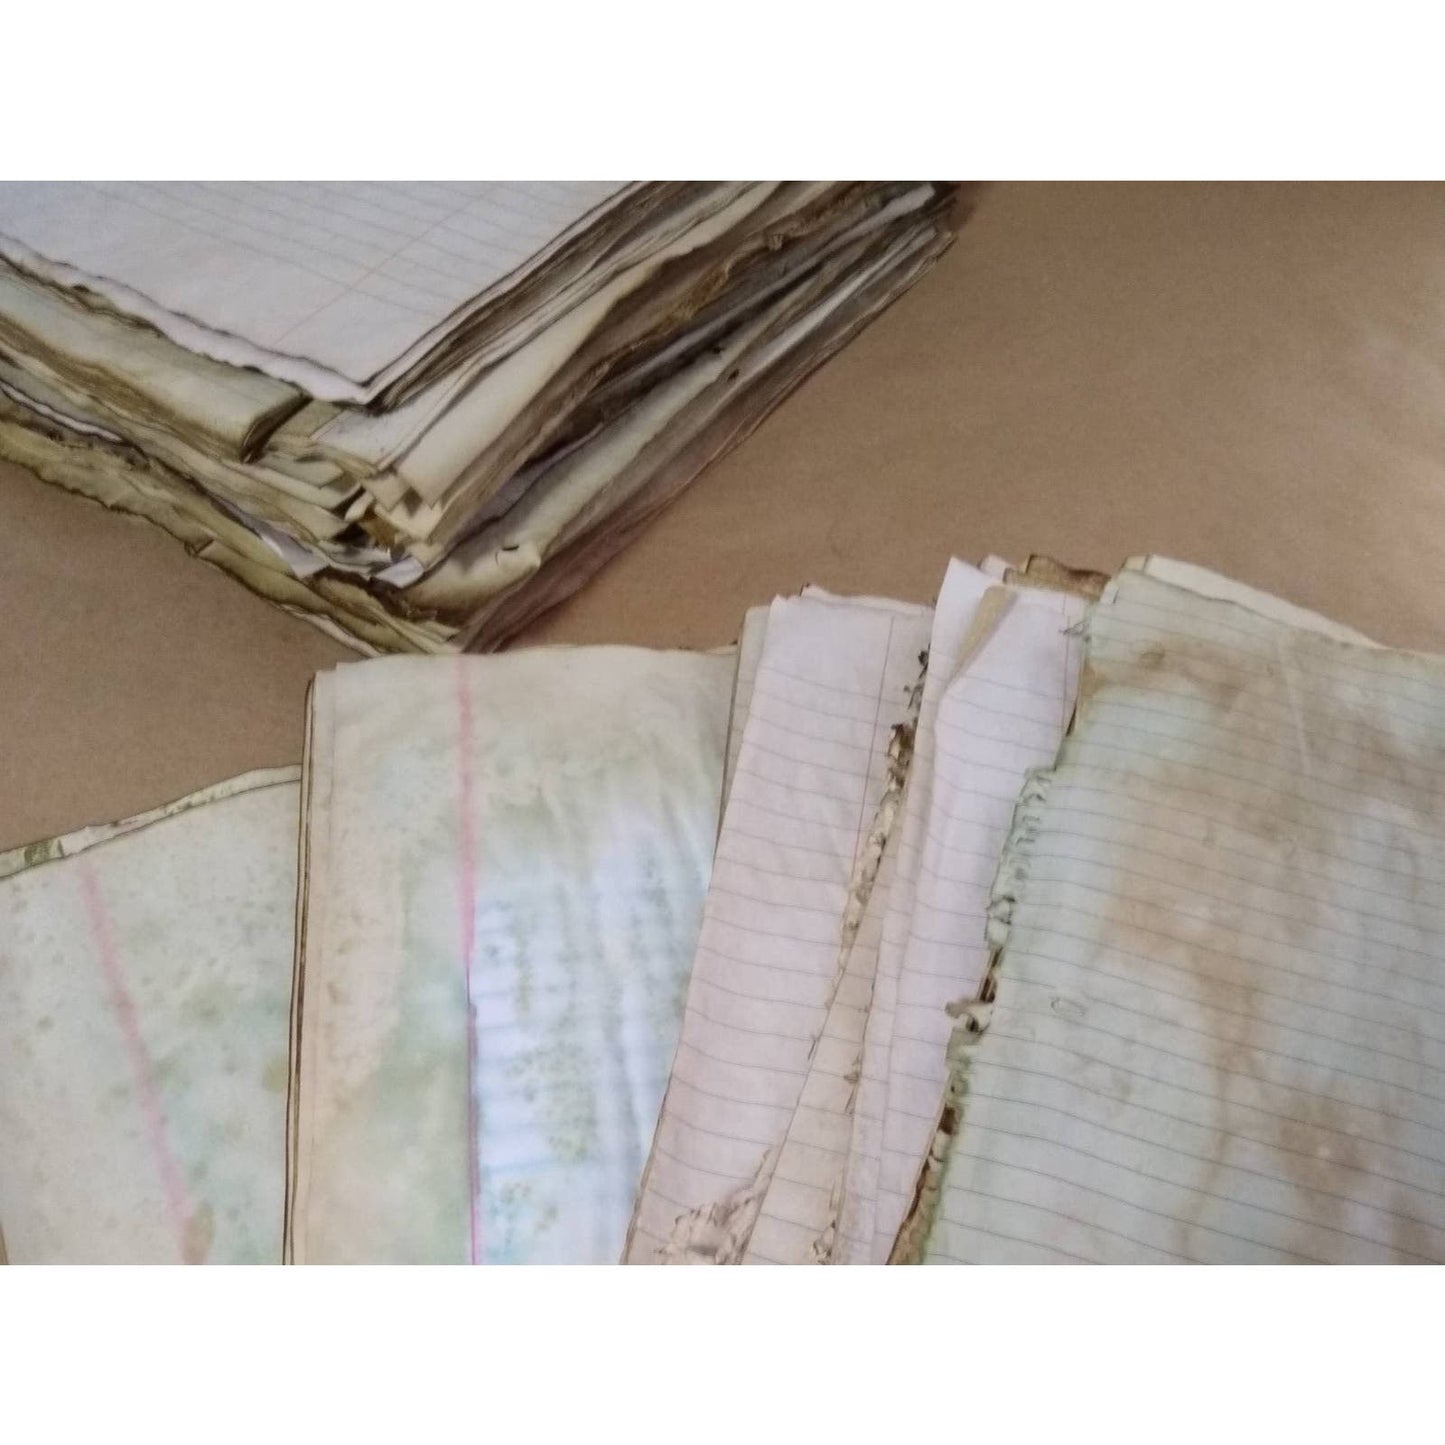 50 Coffee Dyed Notebook Papers, Hand Dyed Papers, Junk Journal Supply